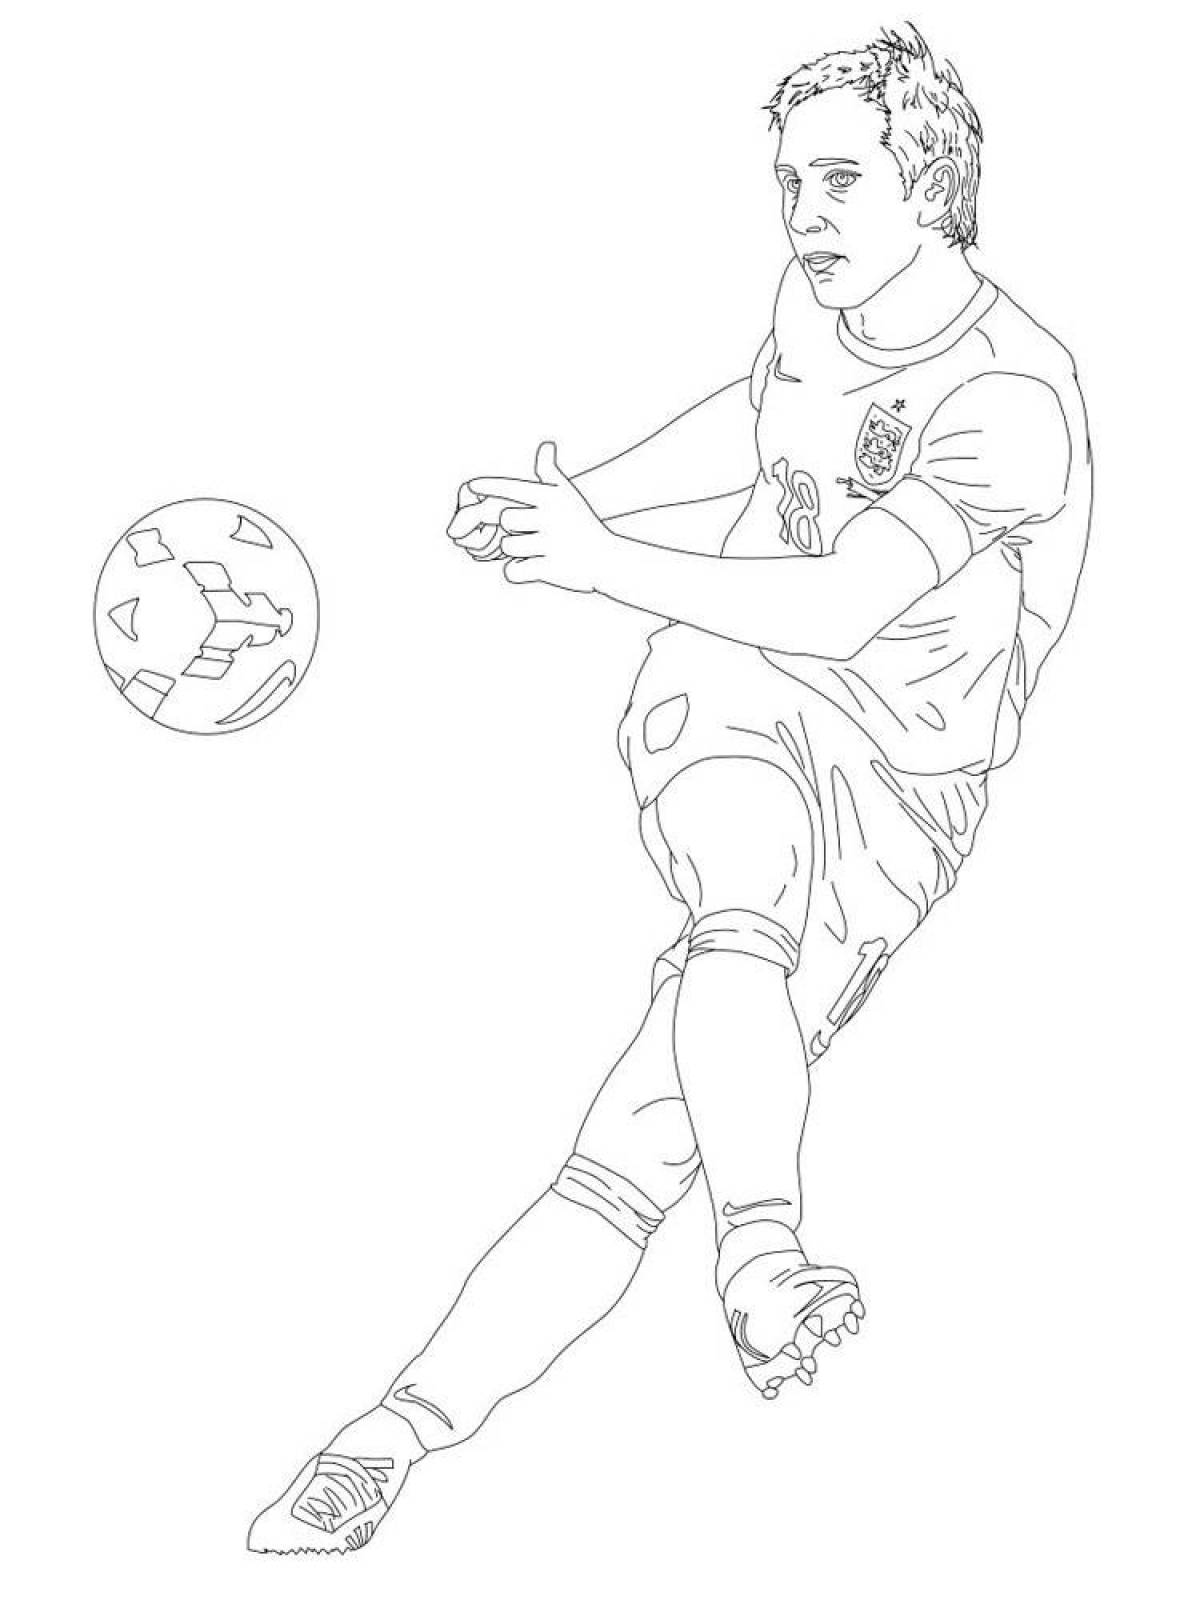 Animated soccer player coloring page